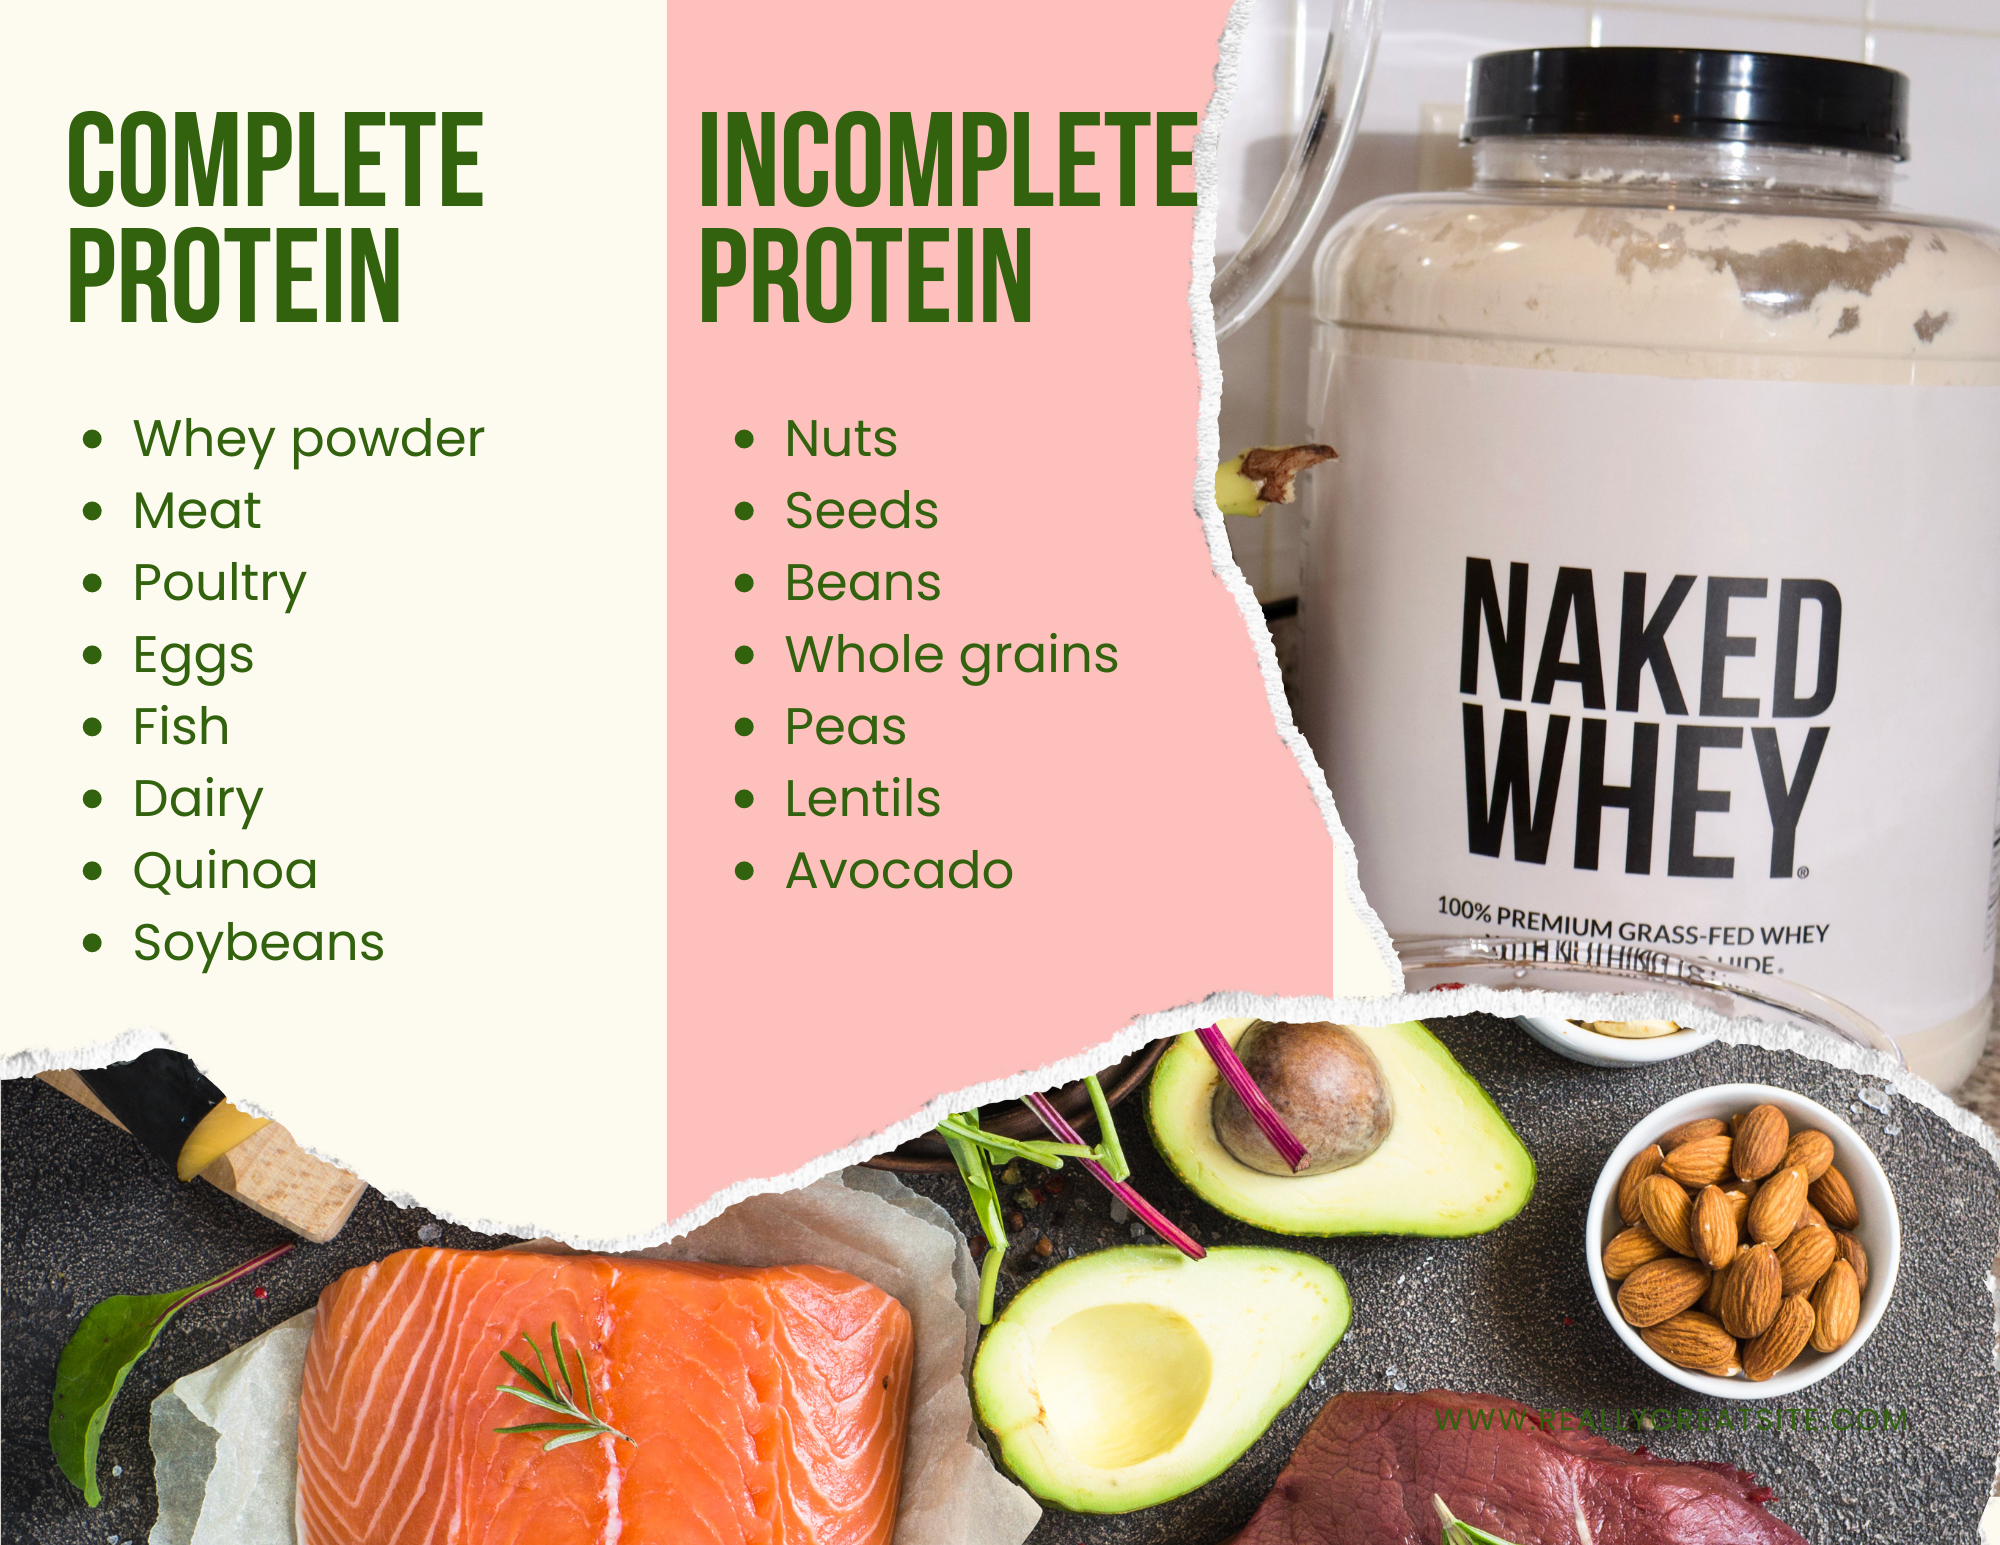 Benefits Of Whey Protein And How To Use